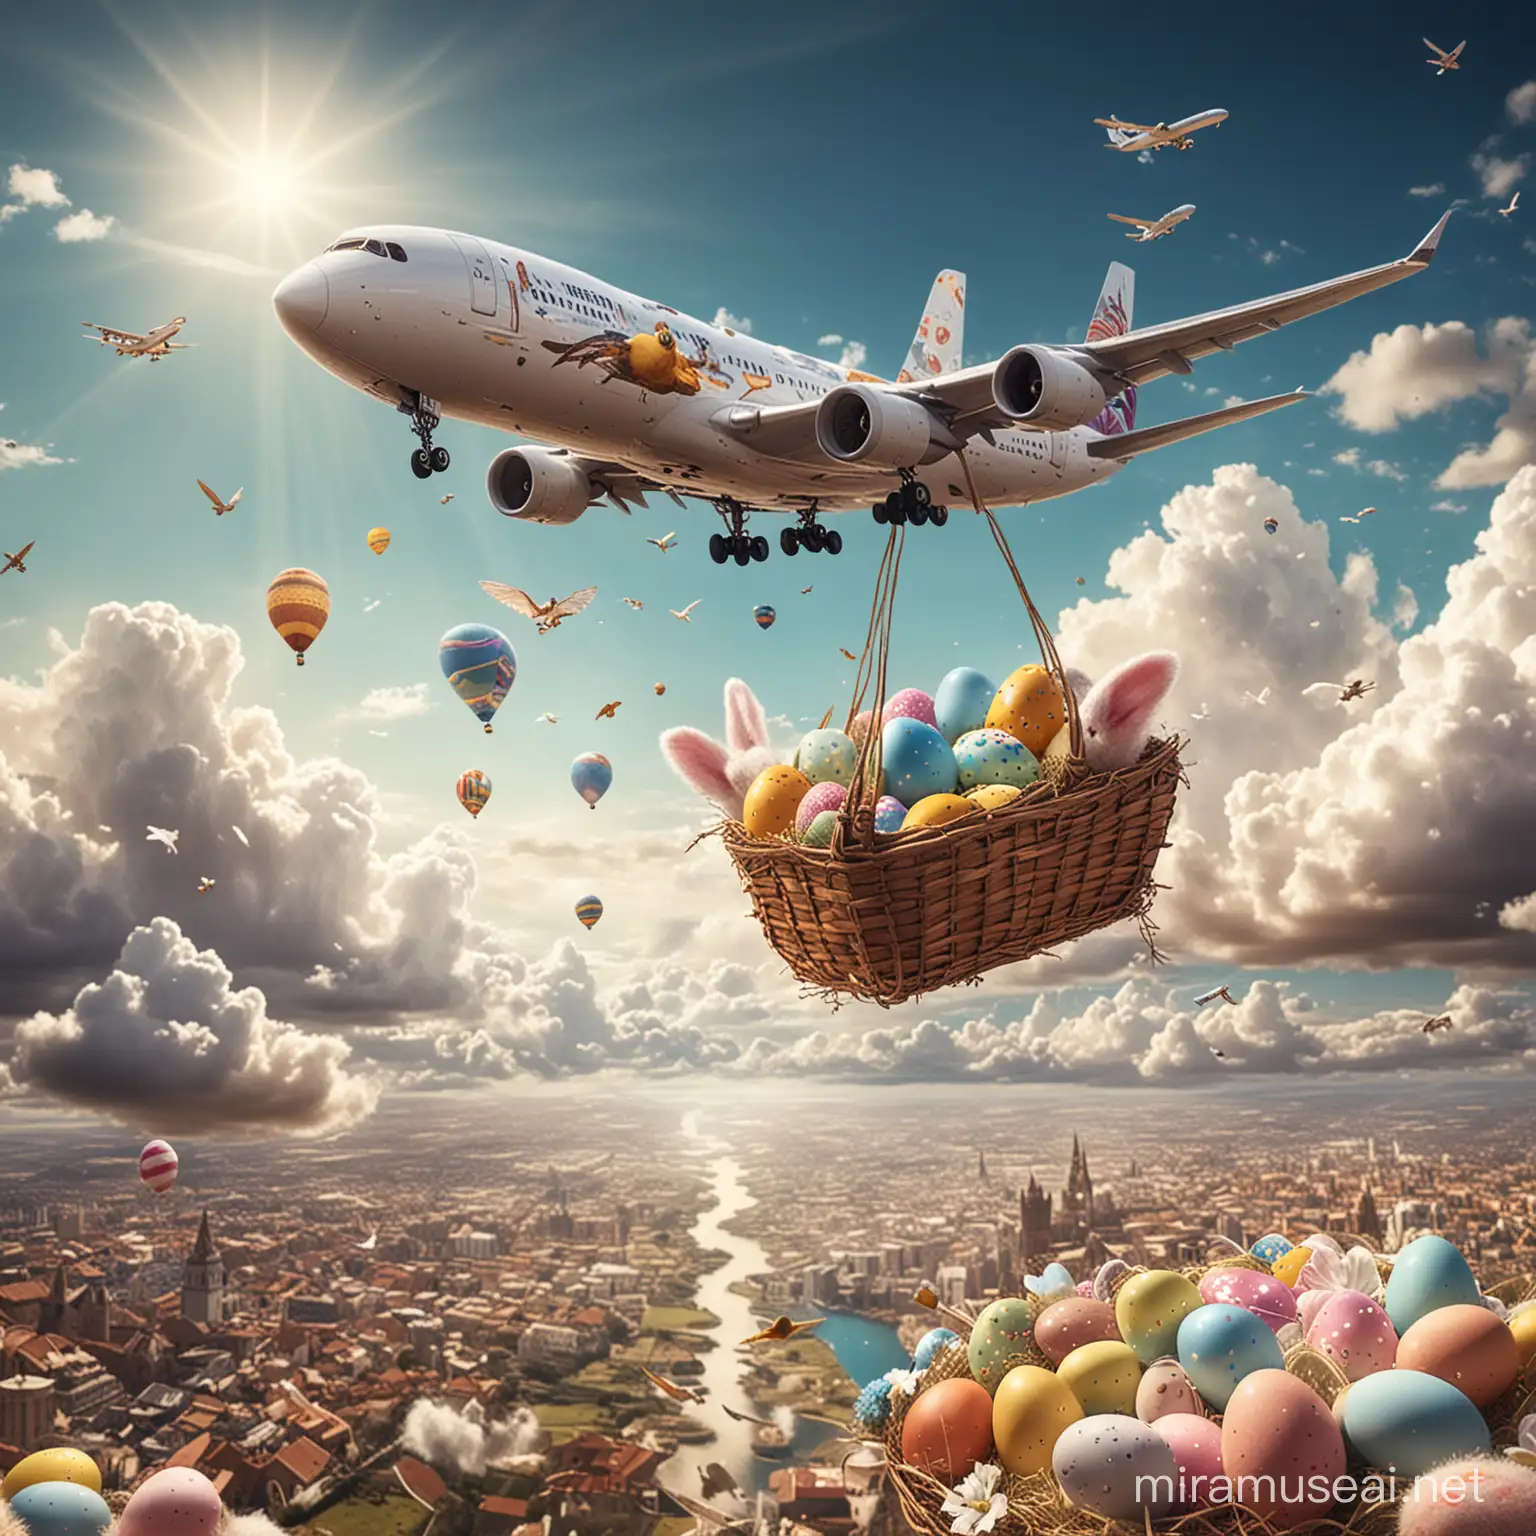 A photorealistic image combining flight travel and Easter themes
